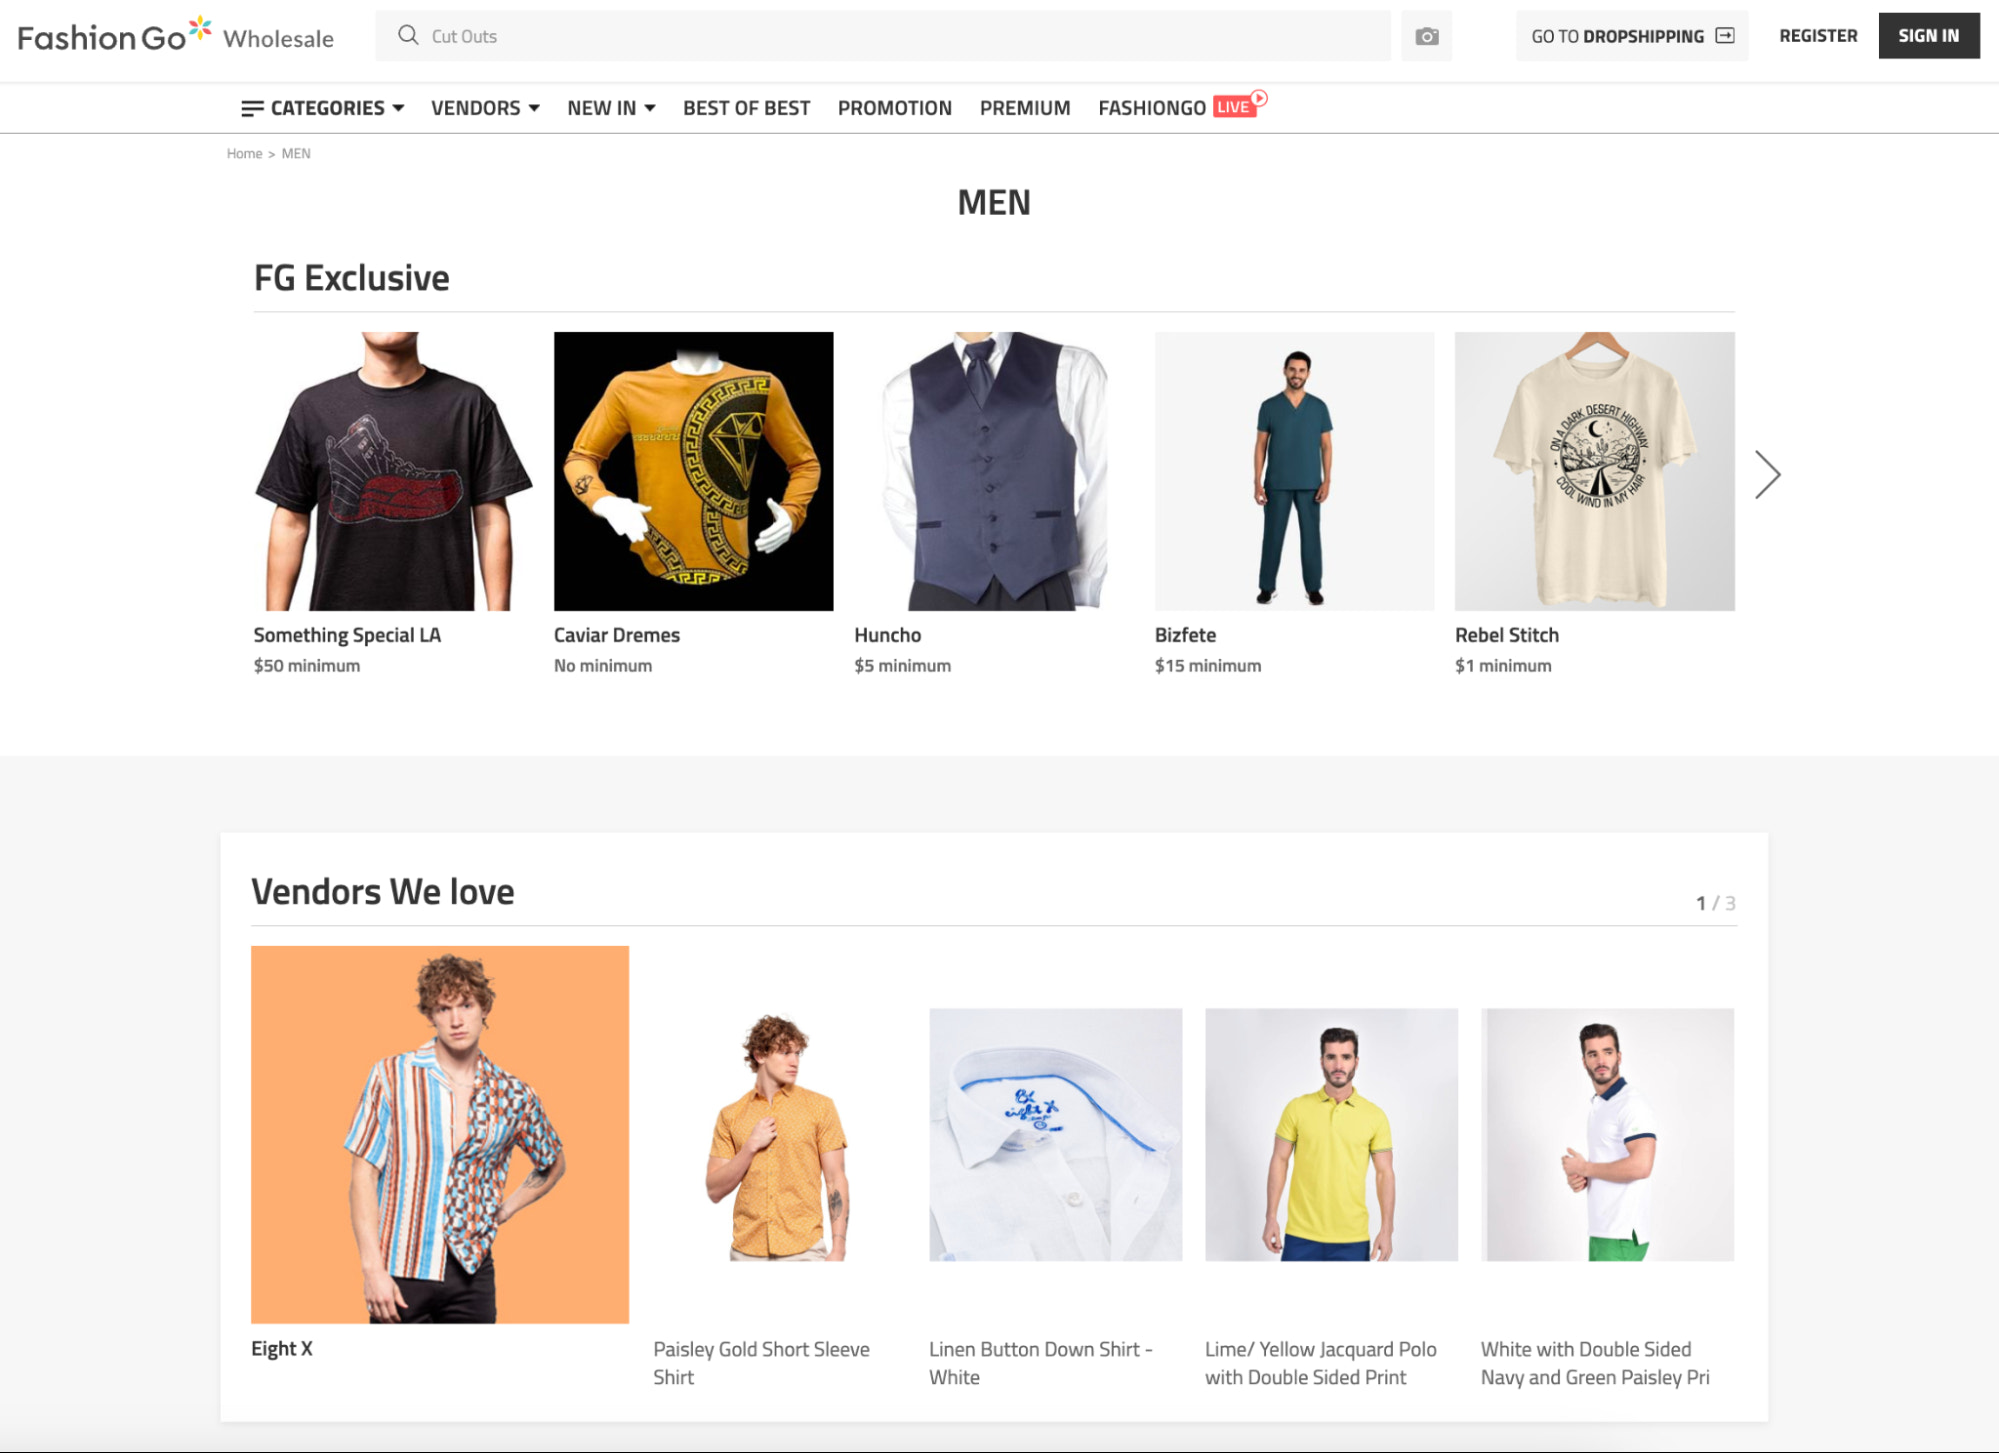 Image of FashionGo wholesale site featuring exclusives and recommended vendors